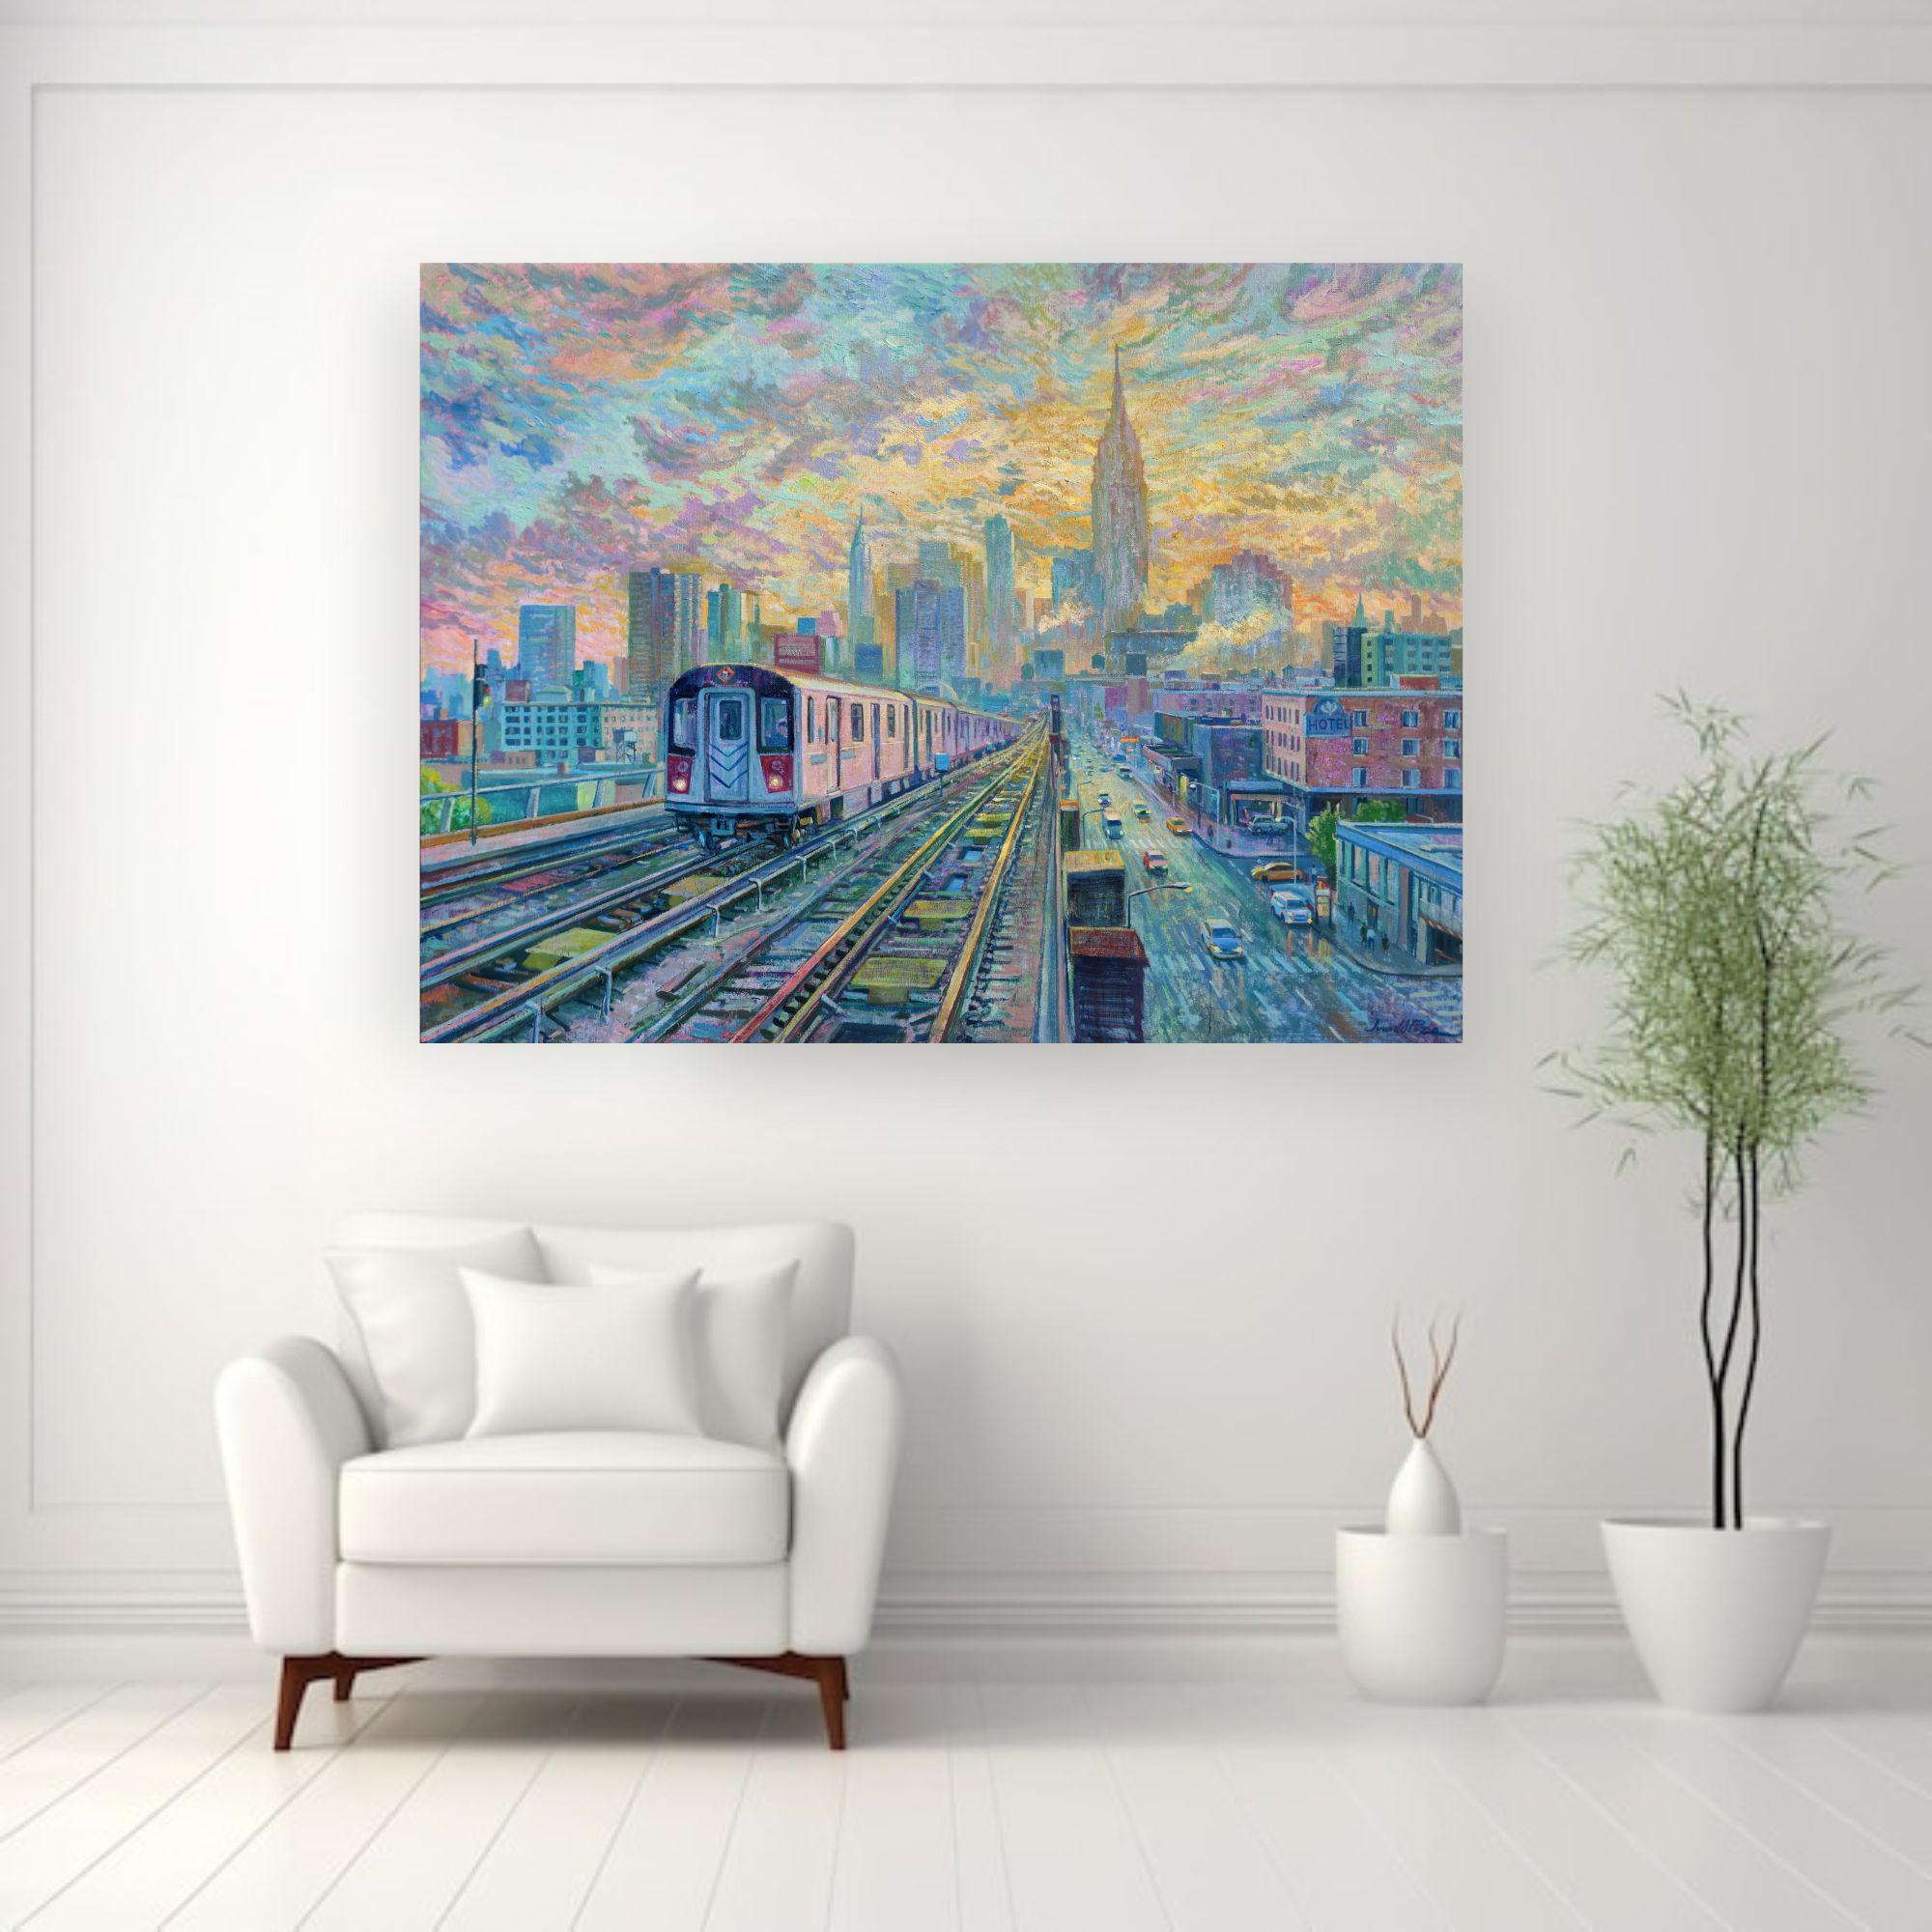 New York Railway - original cityscape impressionism oil painting-modern art - Painting by Juan del Pozo